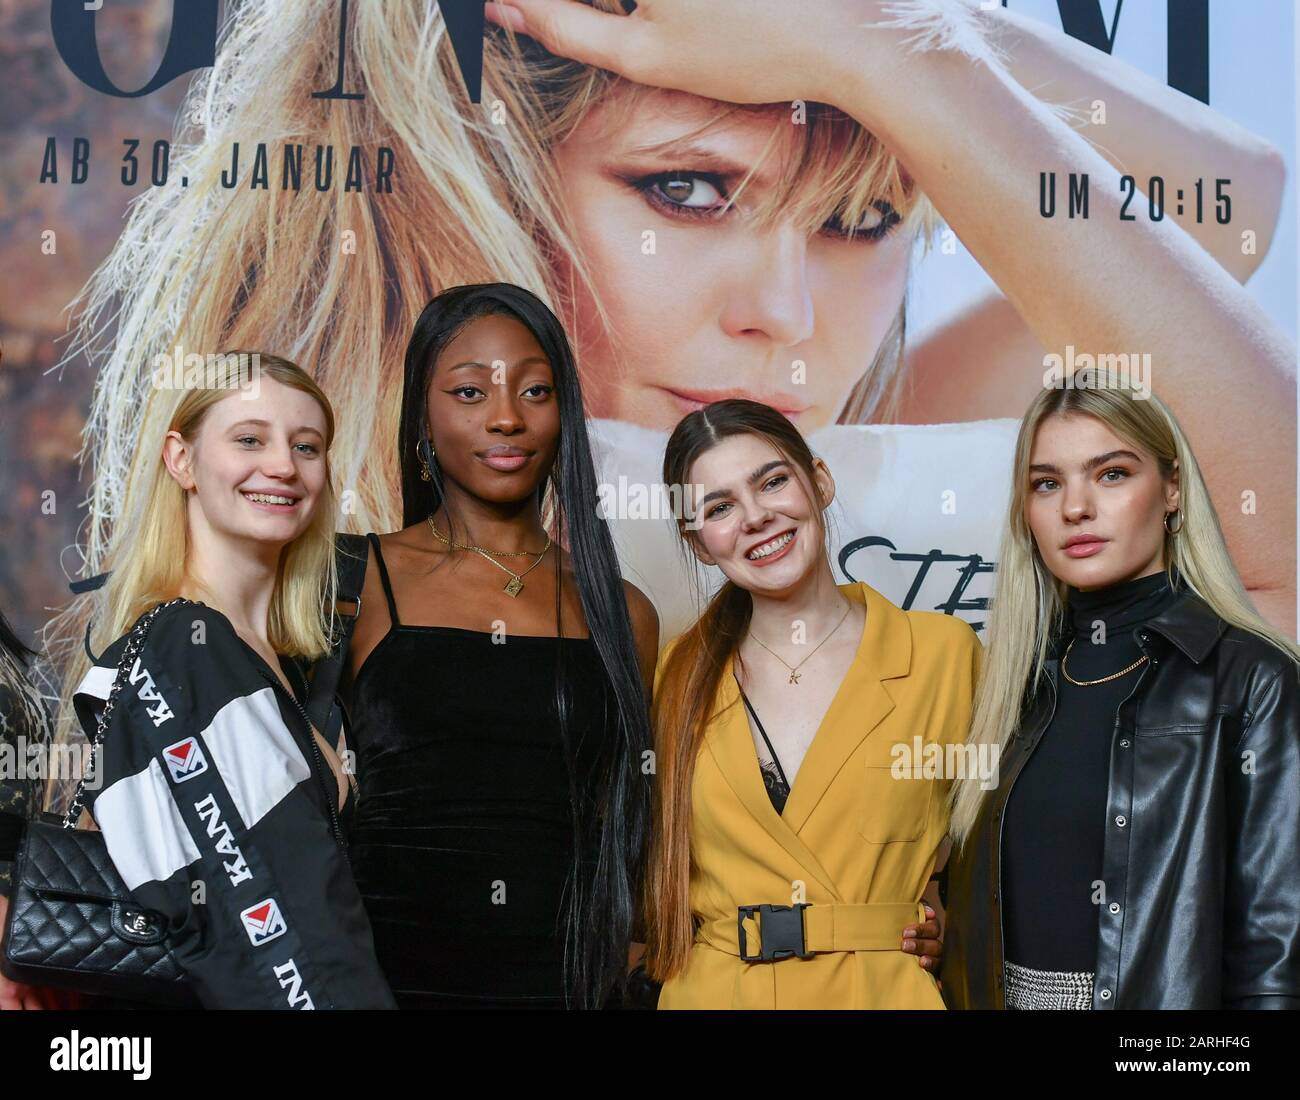 Berlin, Germany. 27th Jan, 2020. The models Trixi Giese (l-r), Toni  Dreher-Adenuga, Klaudia with K and Sarah Almoril at the exclusive cinema  preview of the 15th season of "Germany's next Topmodel -